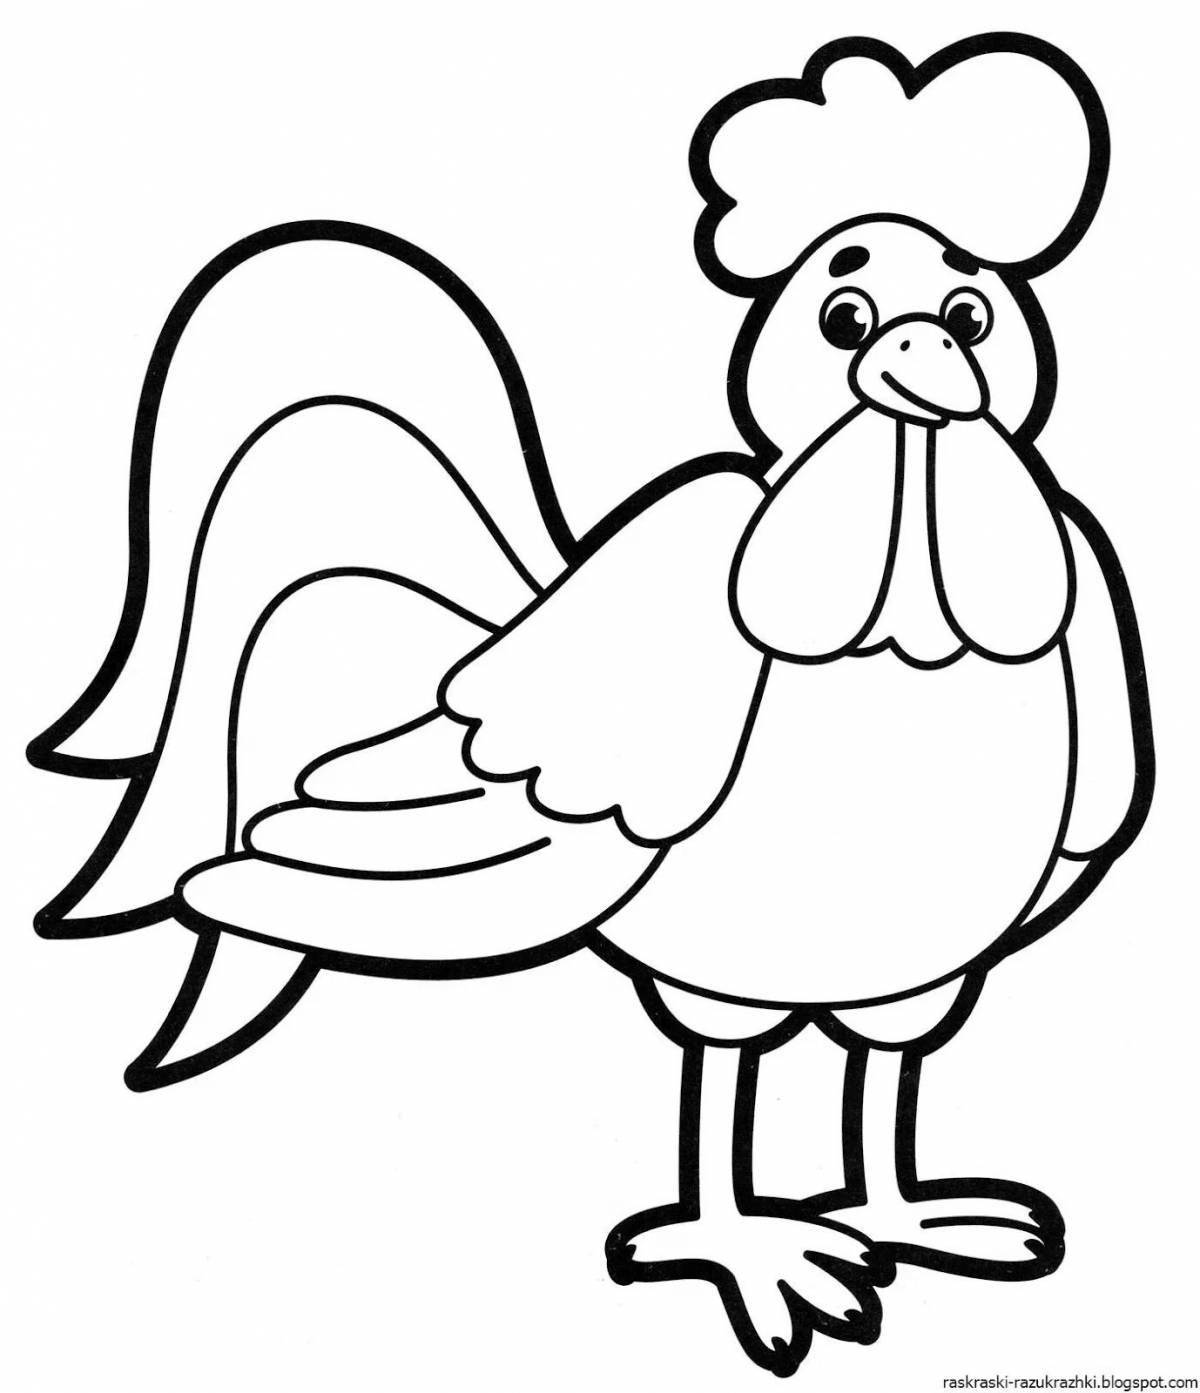 Colorful rooster coloring page for 6-7 year olds